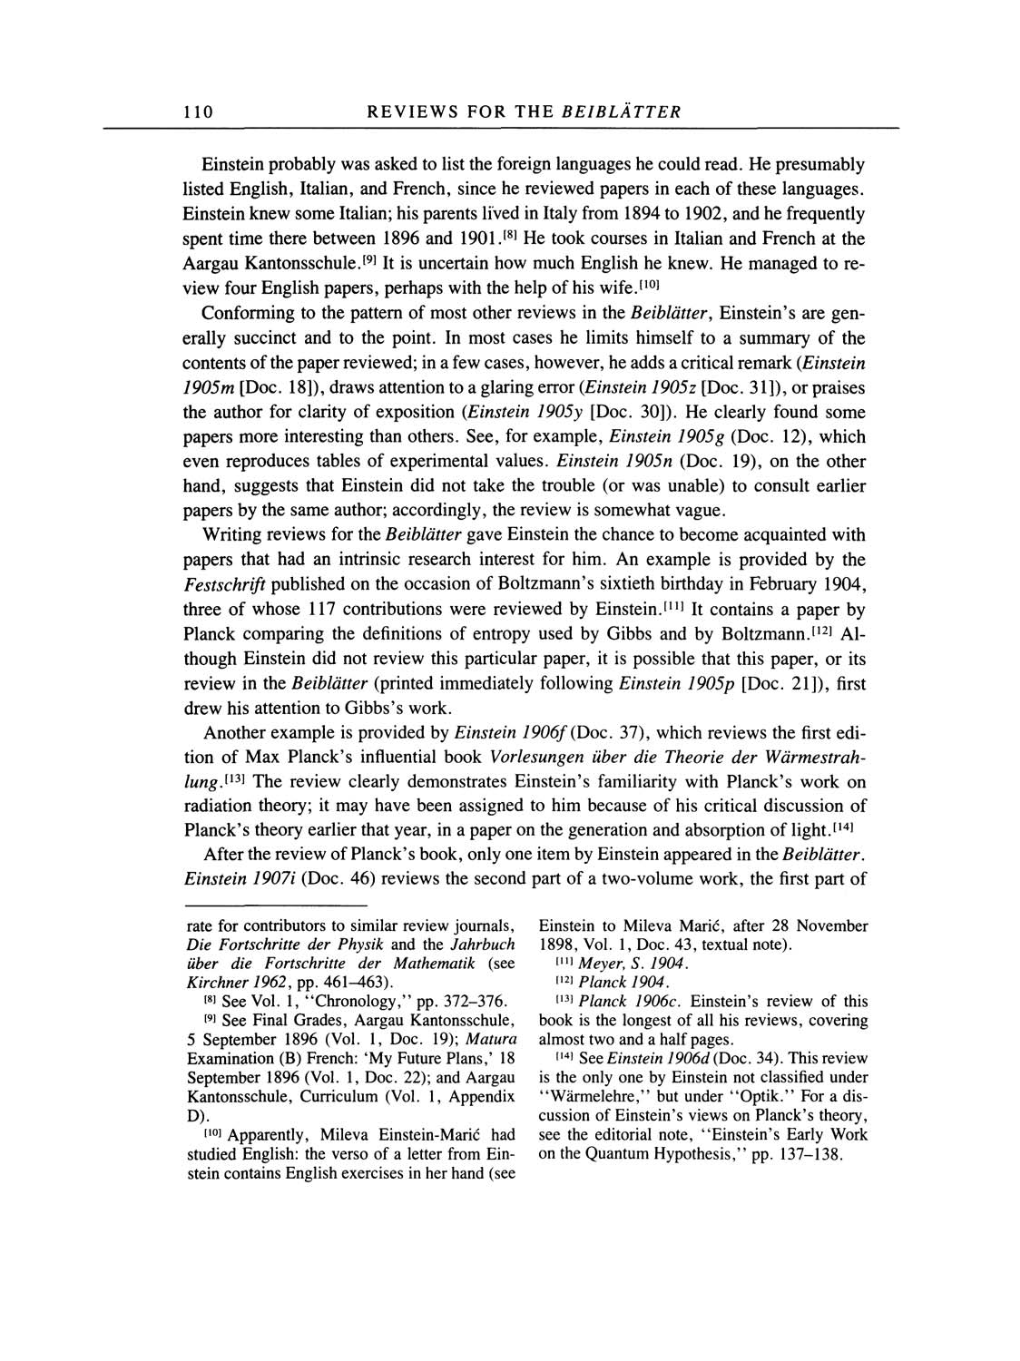 Volume 2: The Swiss Years: Writings, 1900-1909 page 110